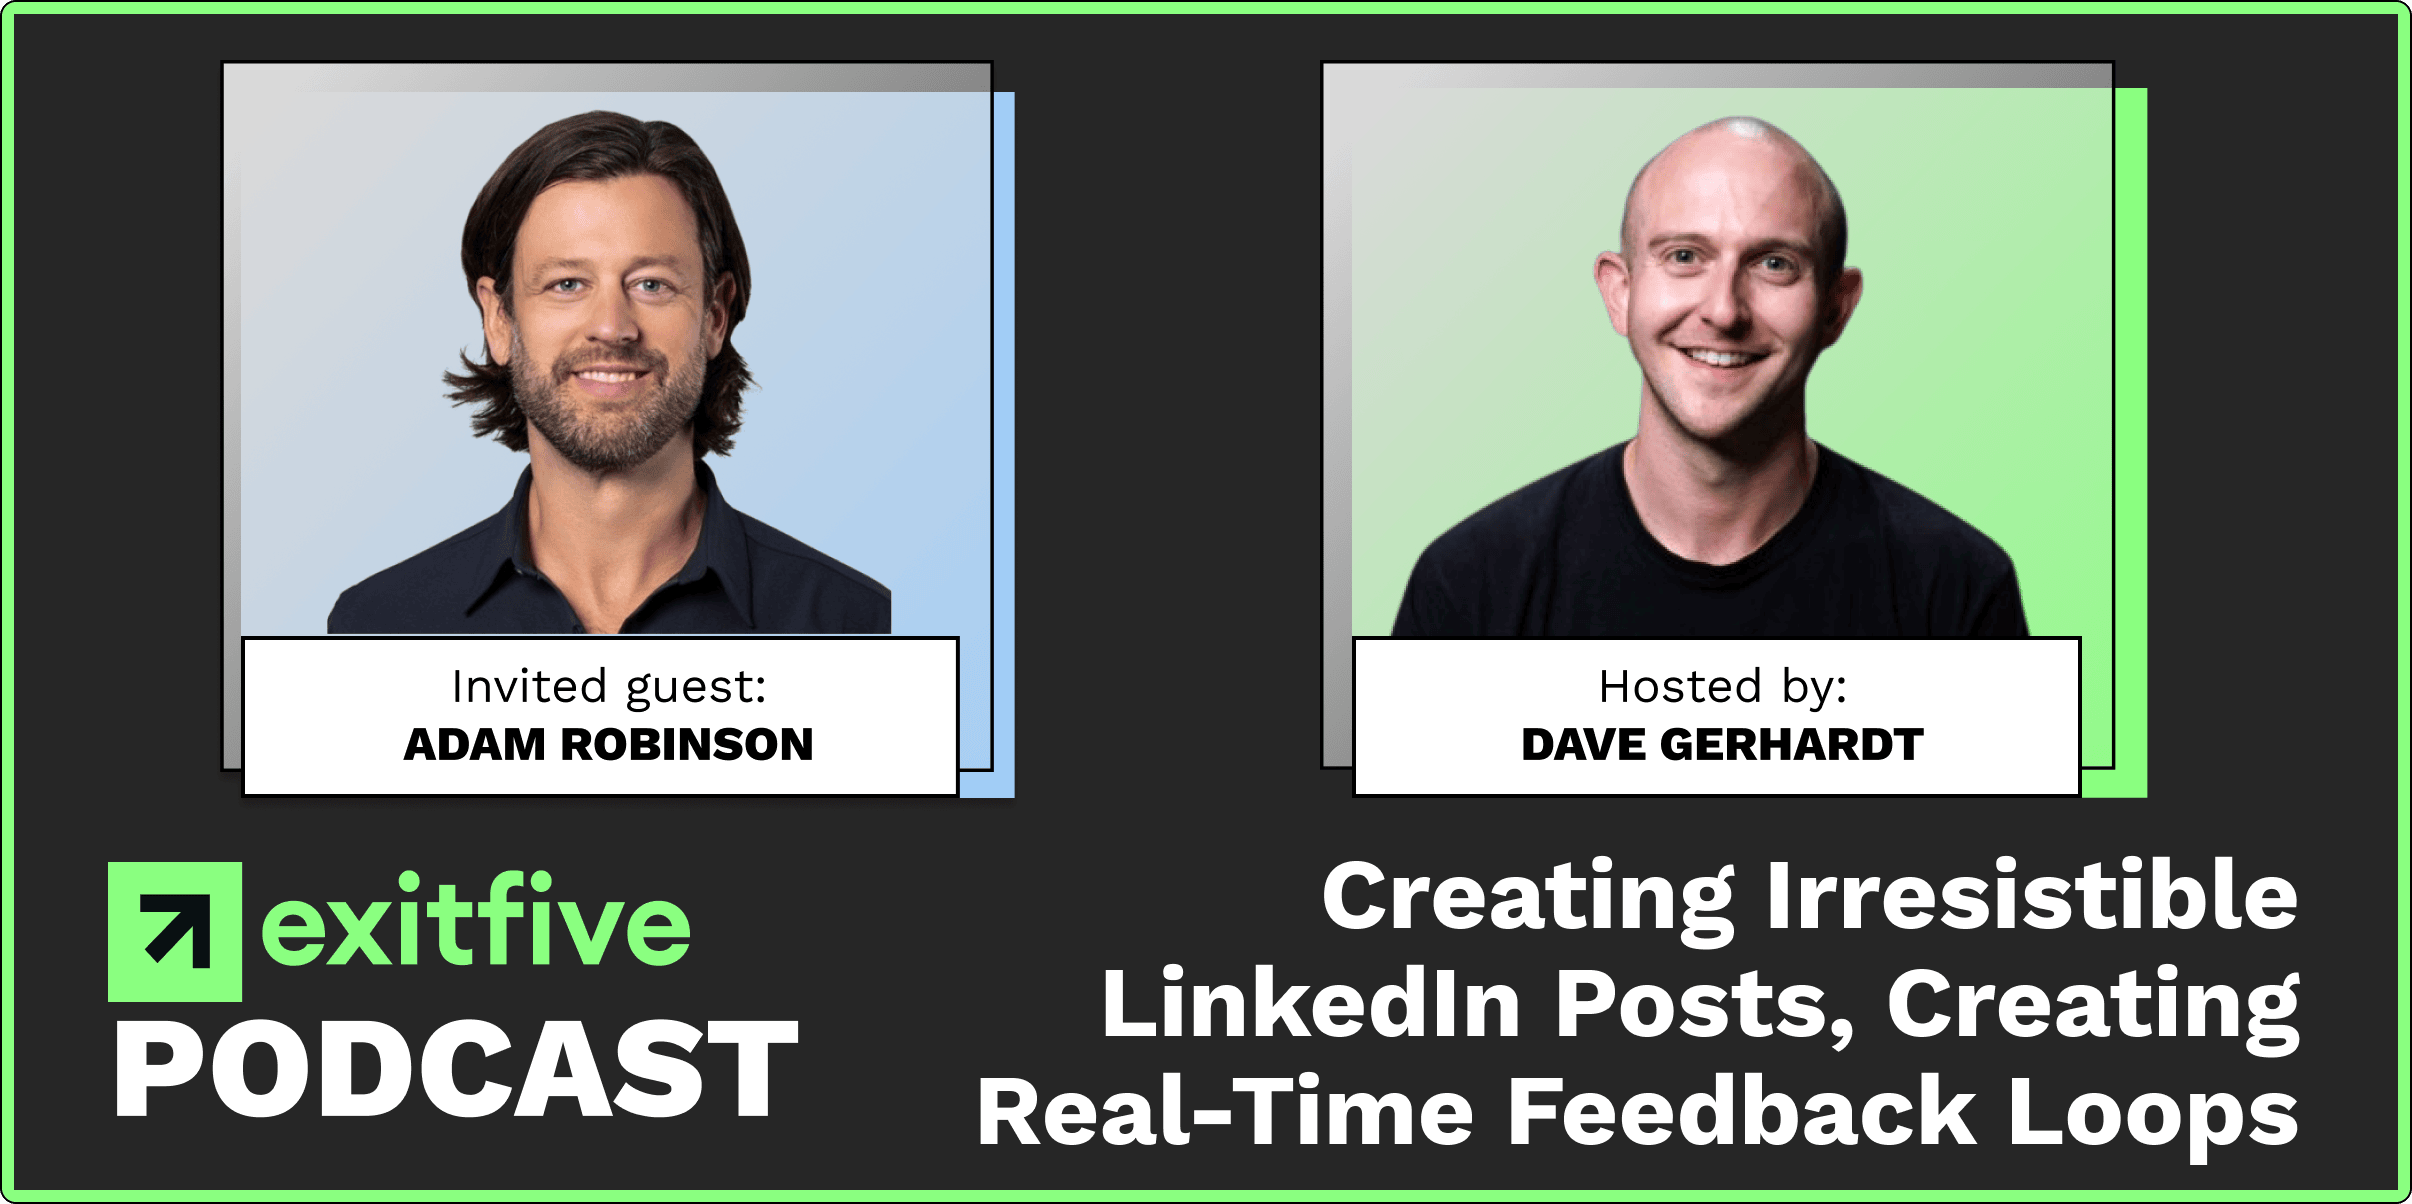 Brand | Creating Irresistible LinkedIn Posts, Creating Real-Time Feedback Loops, and What It Means To Be Authentic with Adam Robinson, CEO of Retention.com